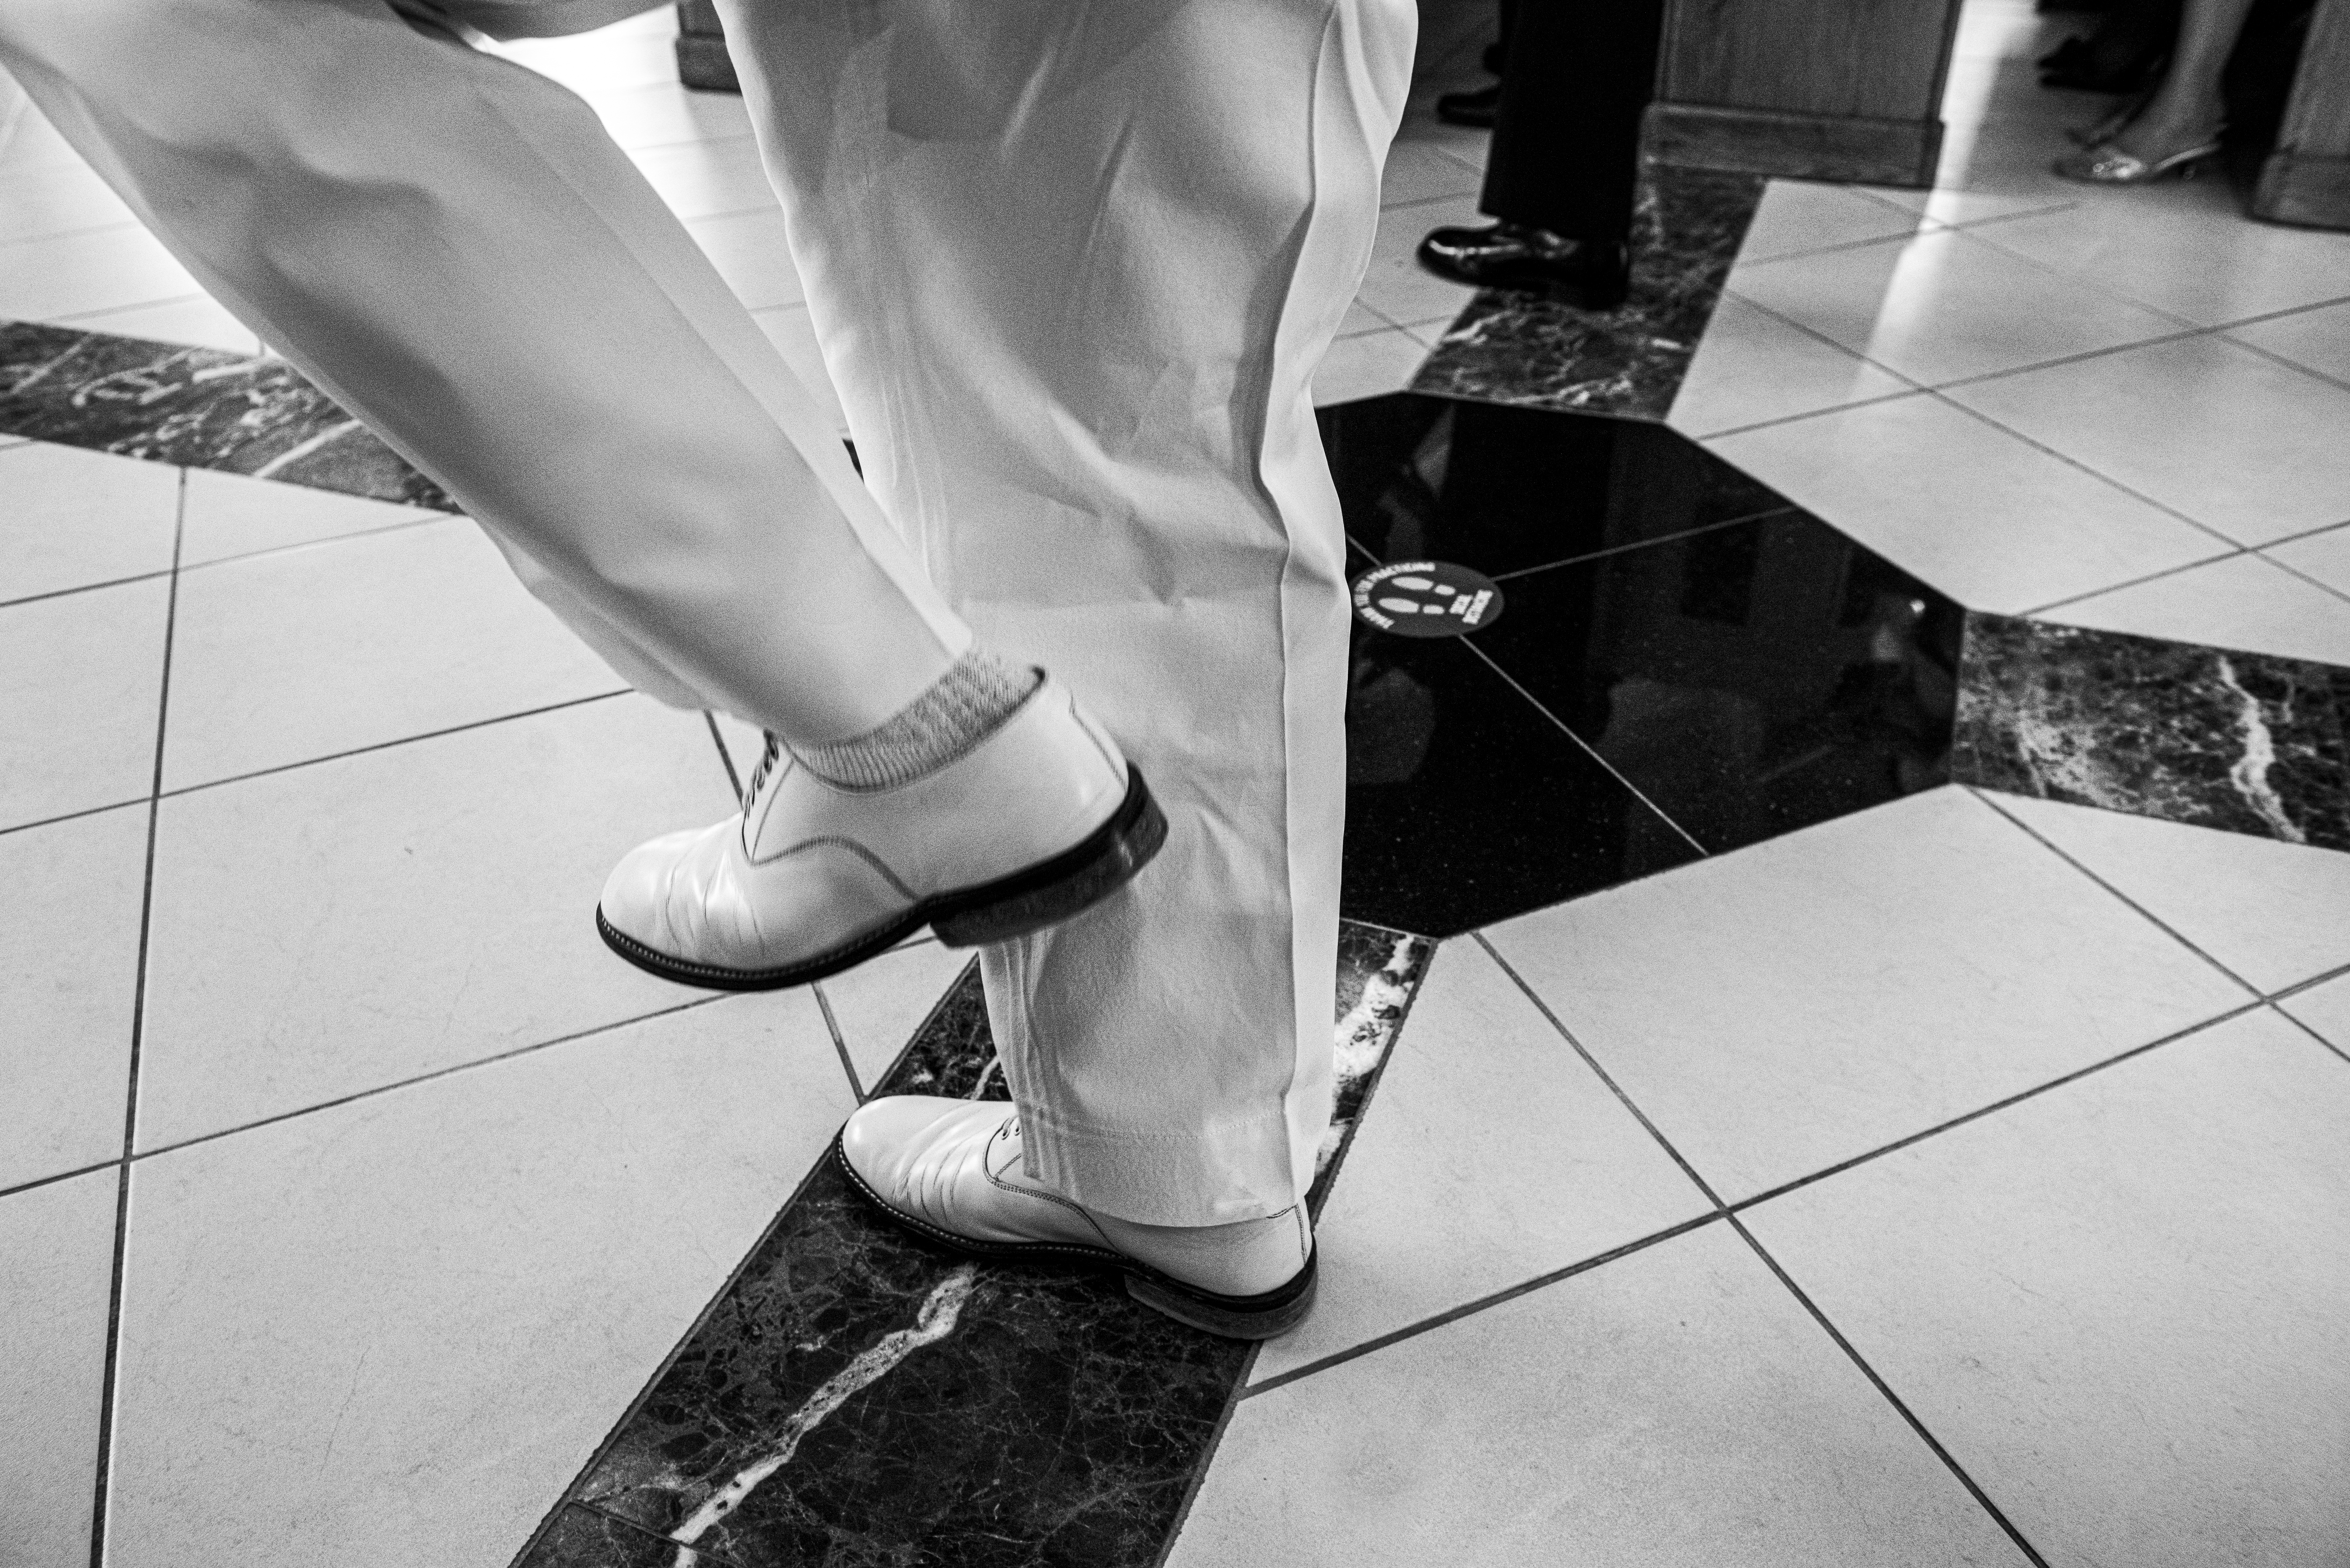 Black and White photo by Hasna Muhammad over white shoes and white pants marching on tiled floor.